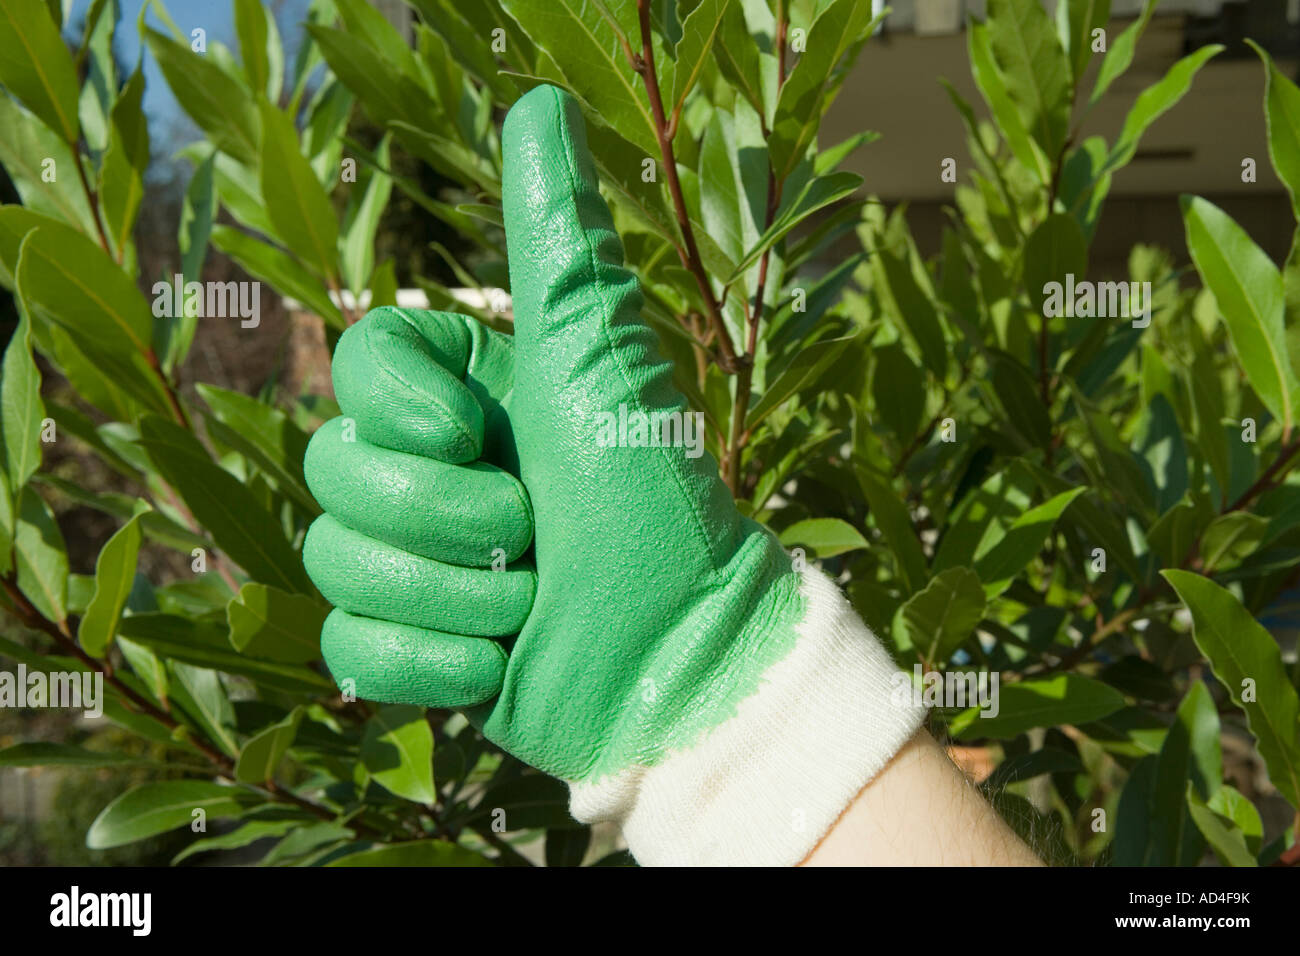 Hand wearing a gardening glove showing thumbs up Stock Photo